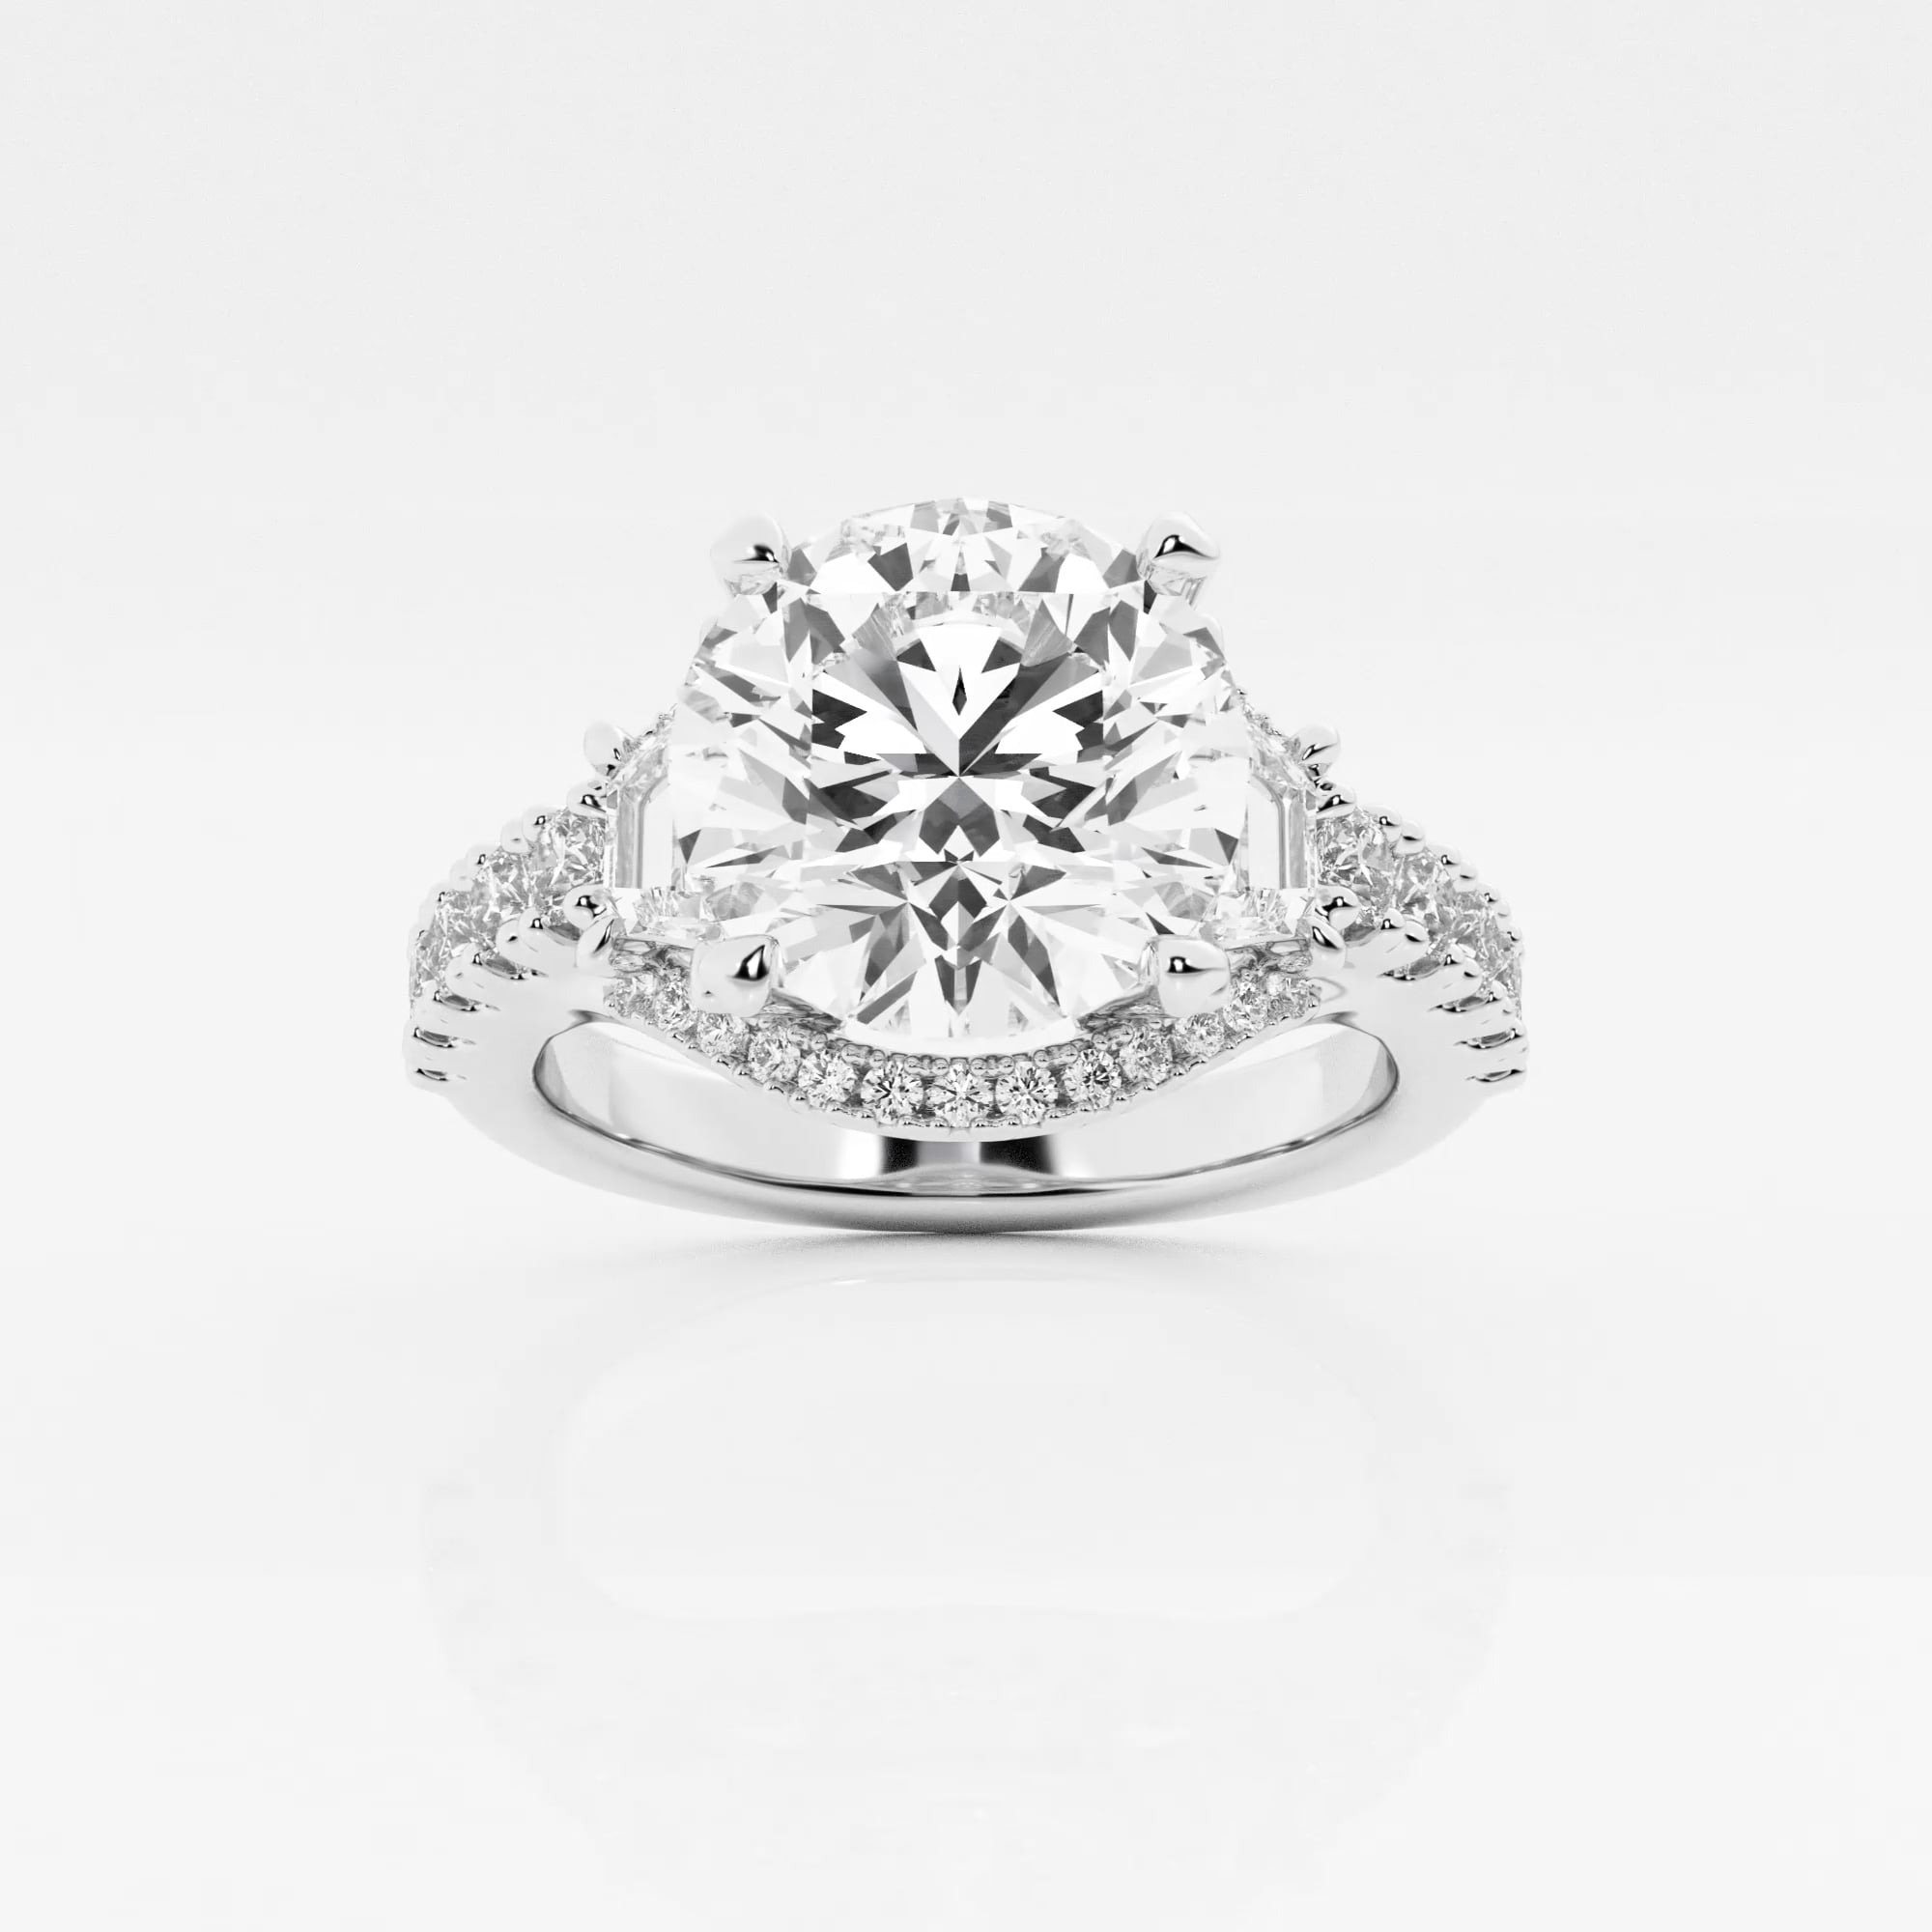 product video for Badgley Mischka Near-Colorless 4 1/3 ctw Round Lab Grown Diamond Engagement Ring